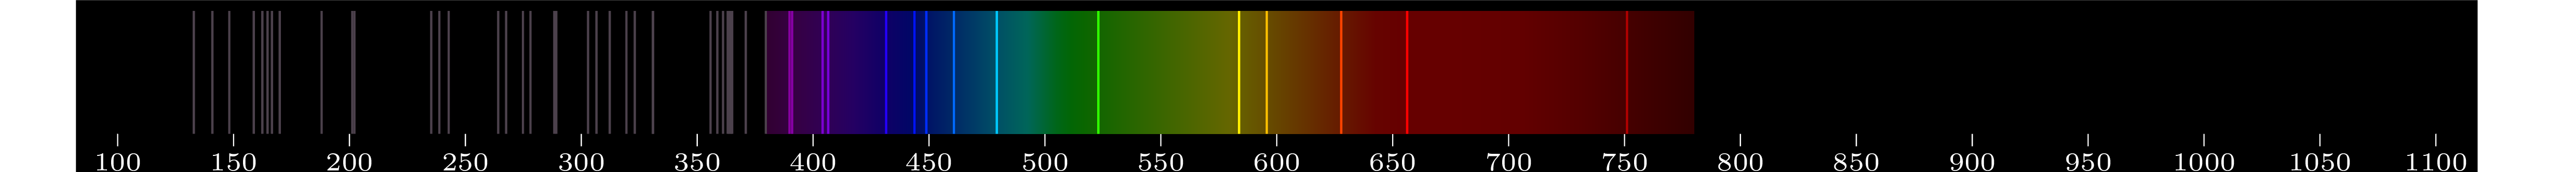 emmision spectra of element Au